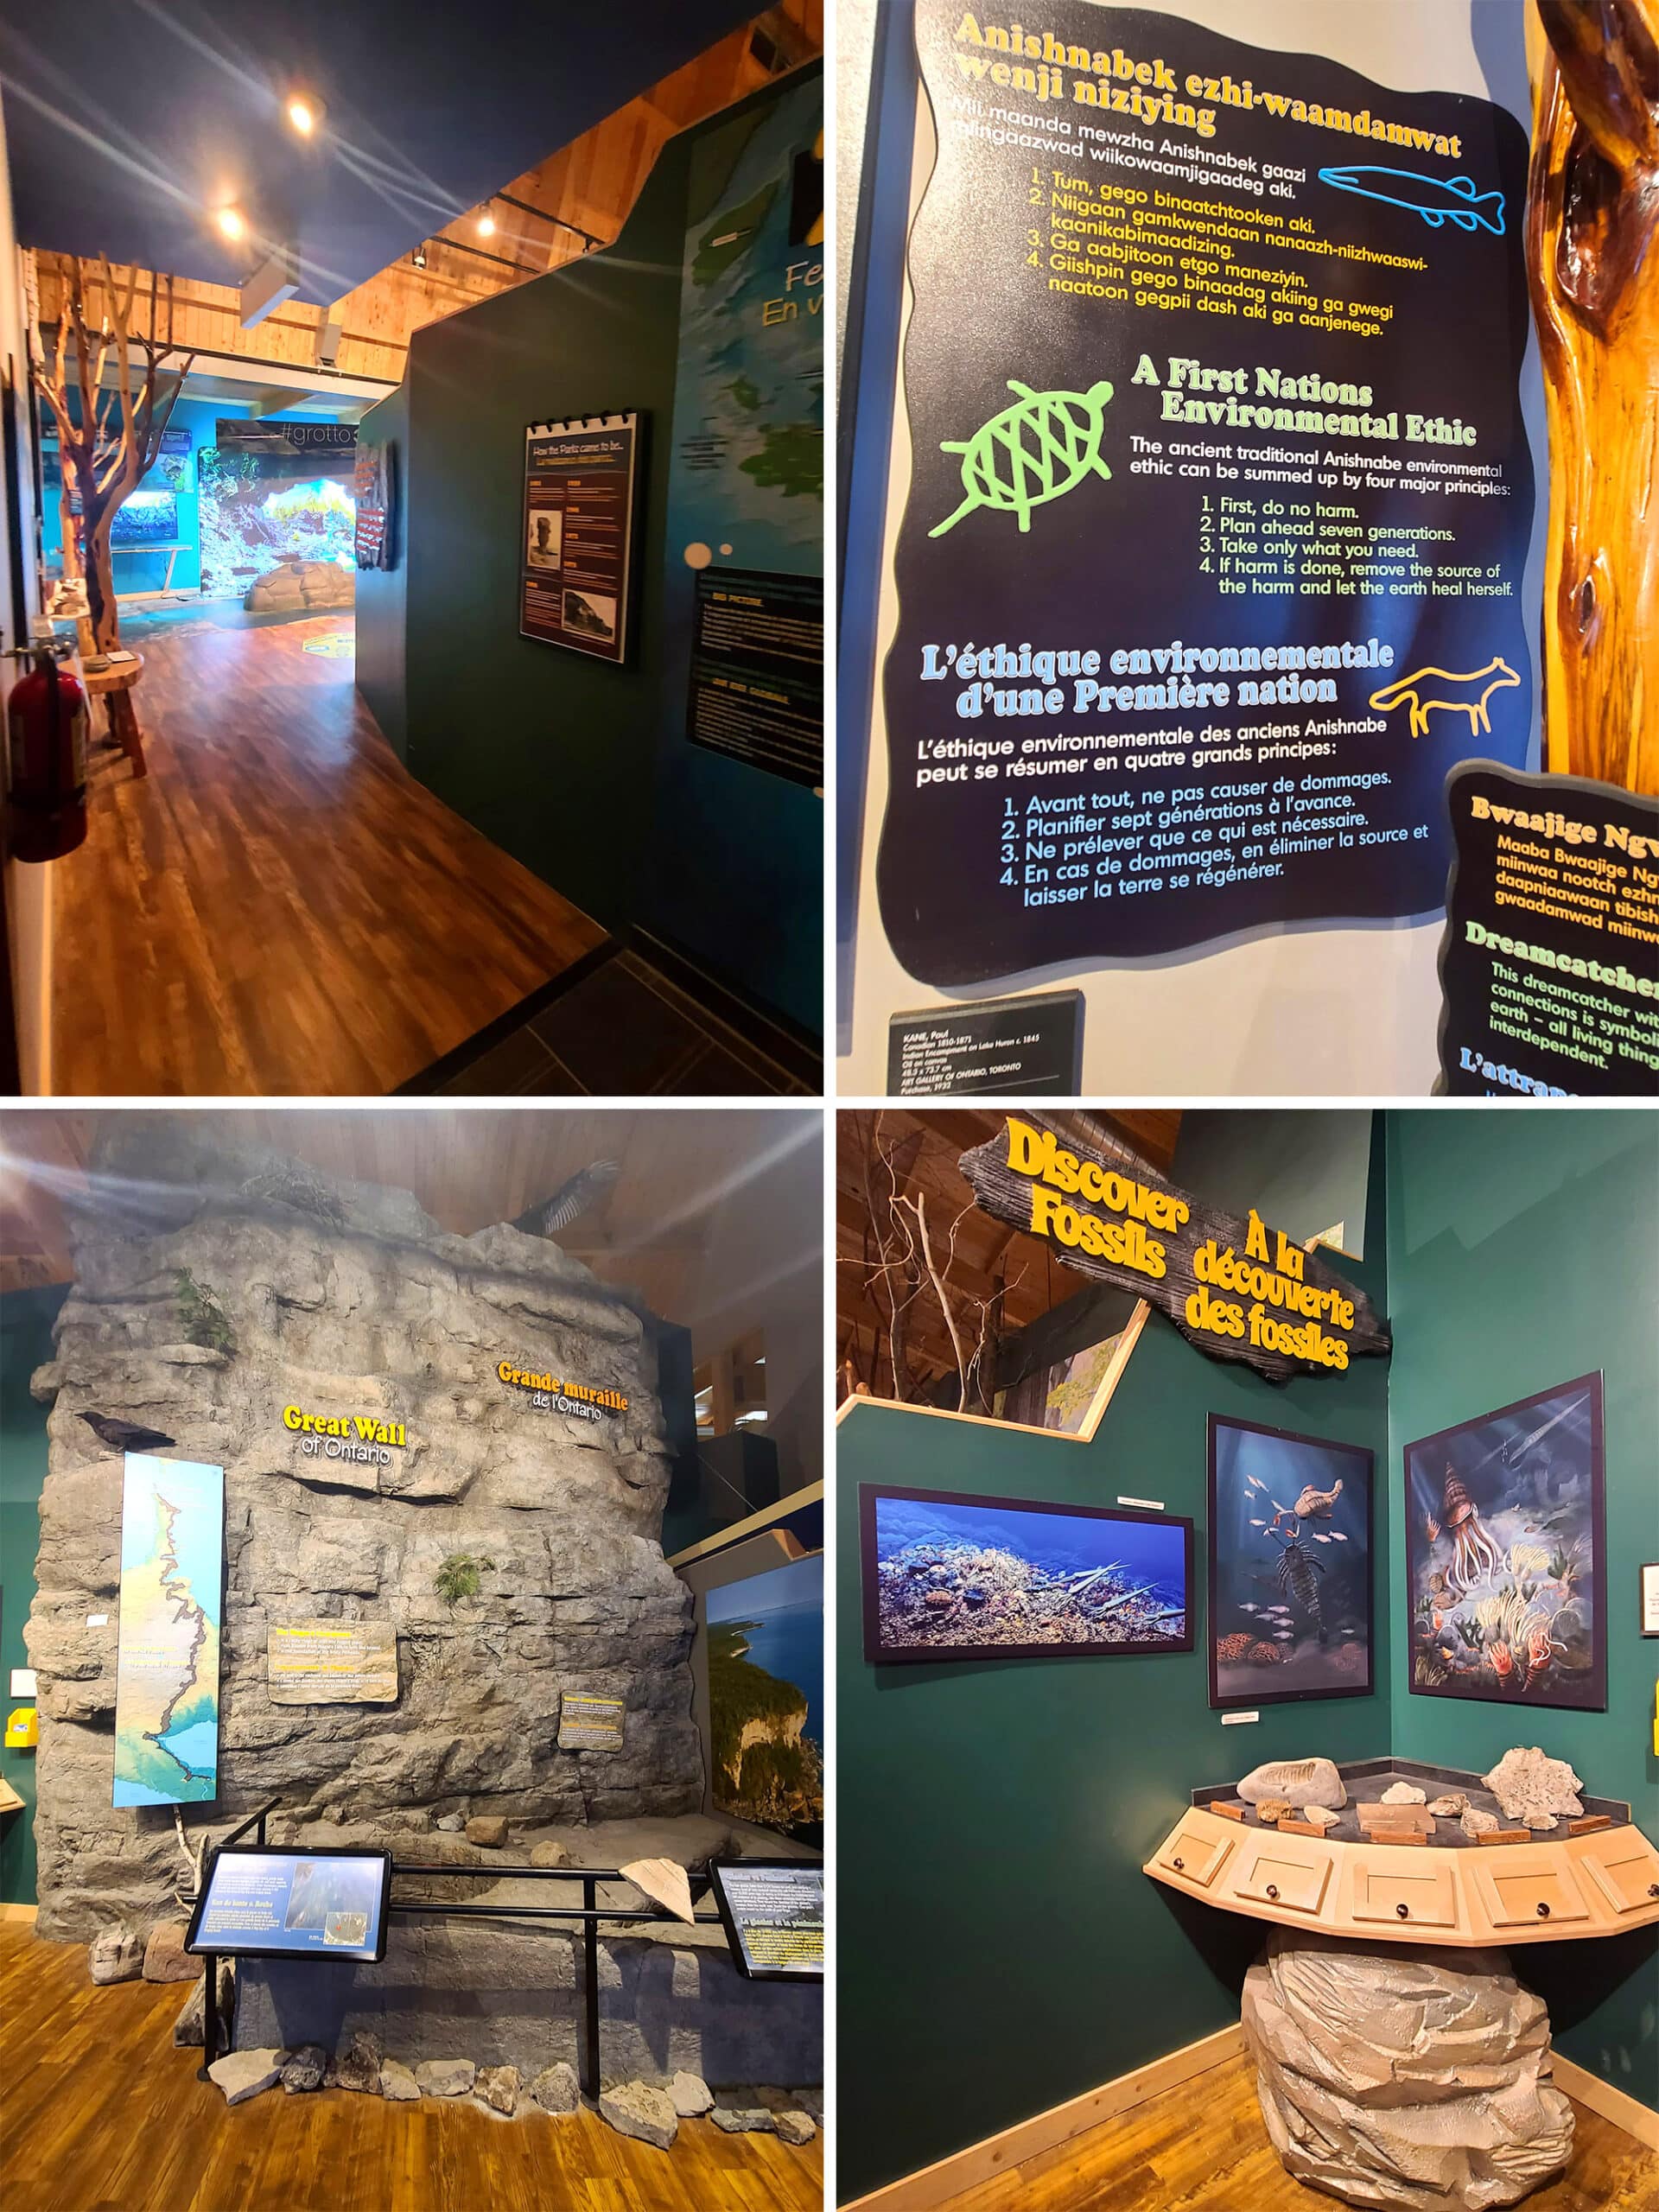 4 part image showing various full scale museum exhibits in the bruce peninsula national park visitor centre.